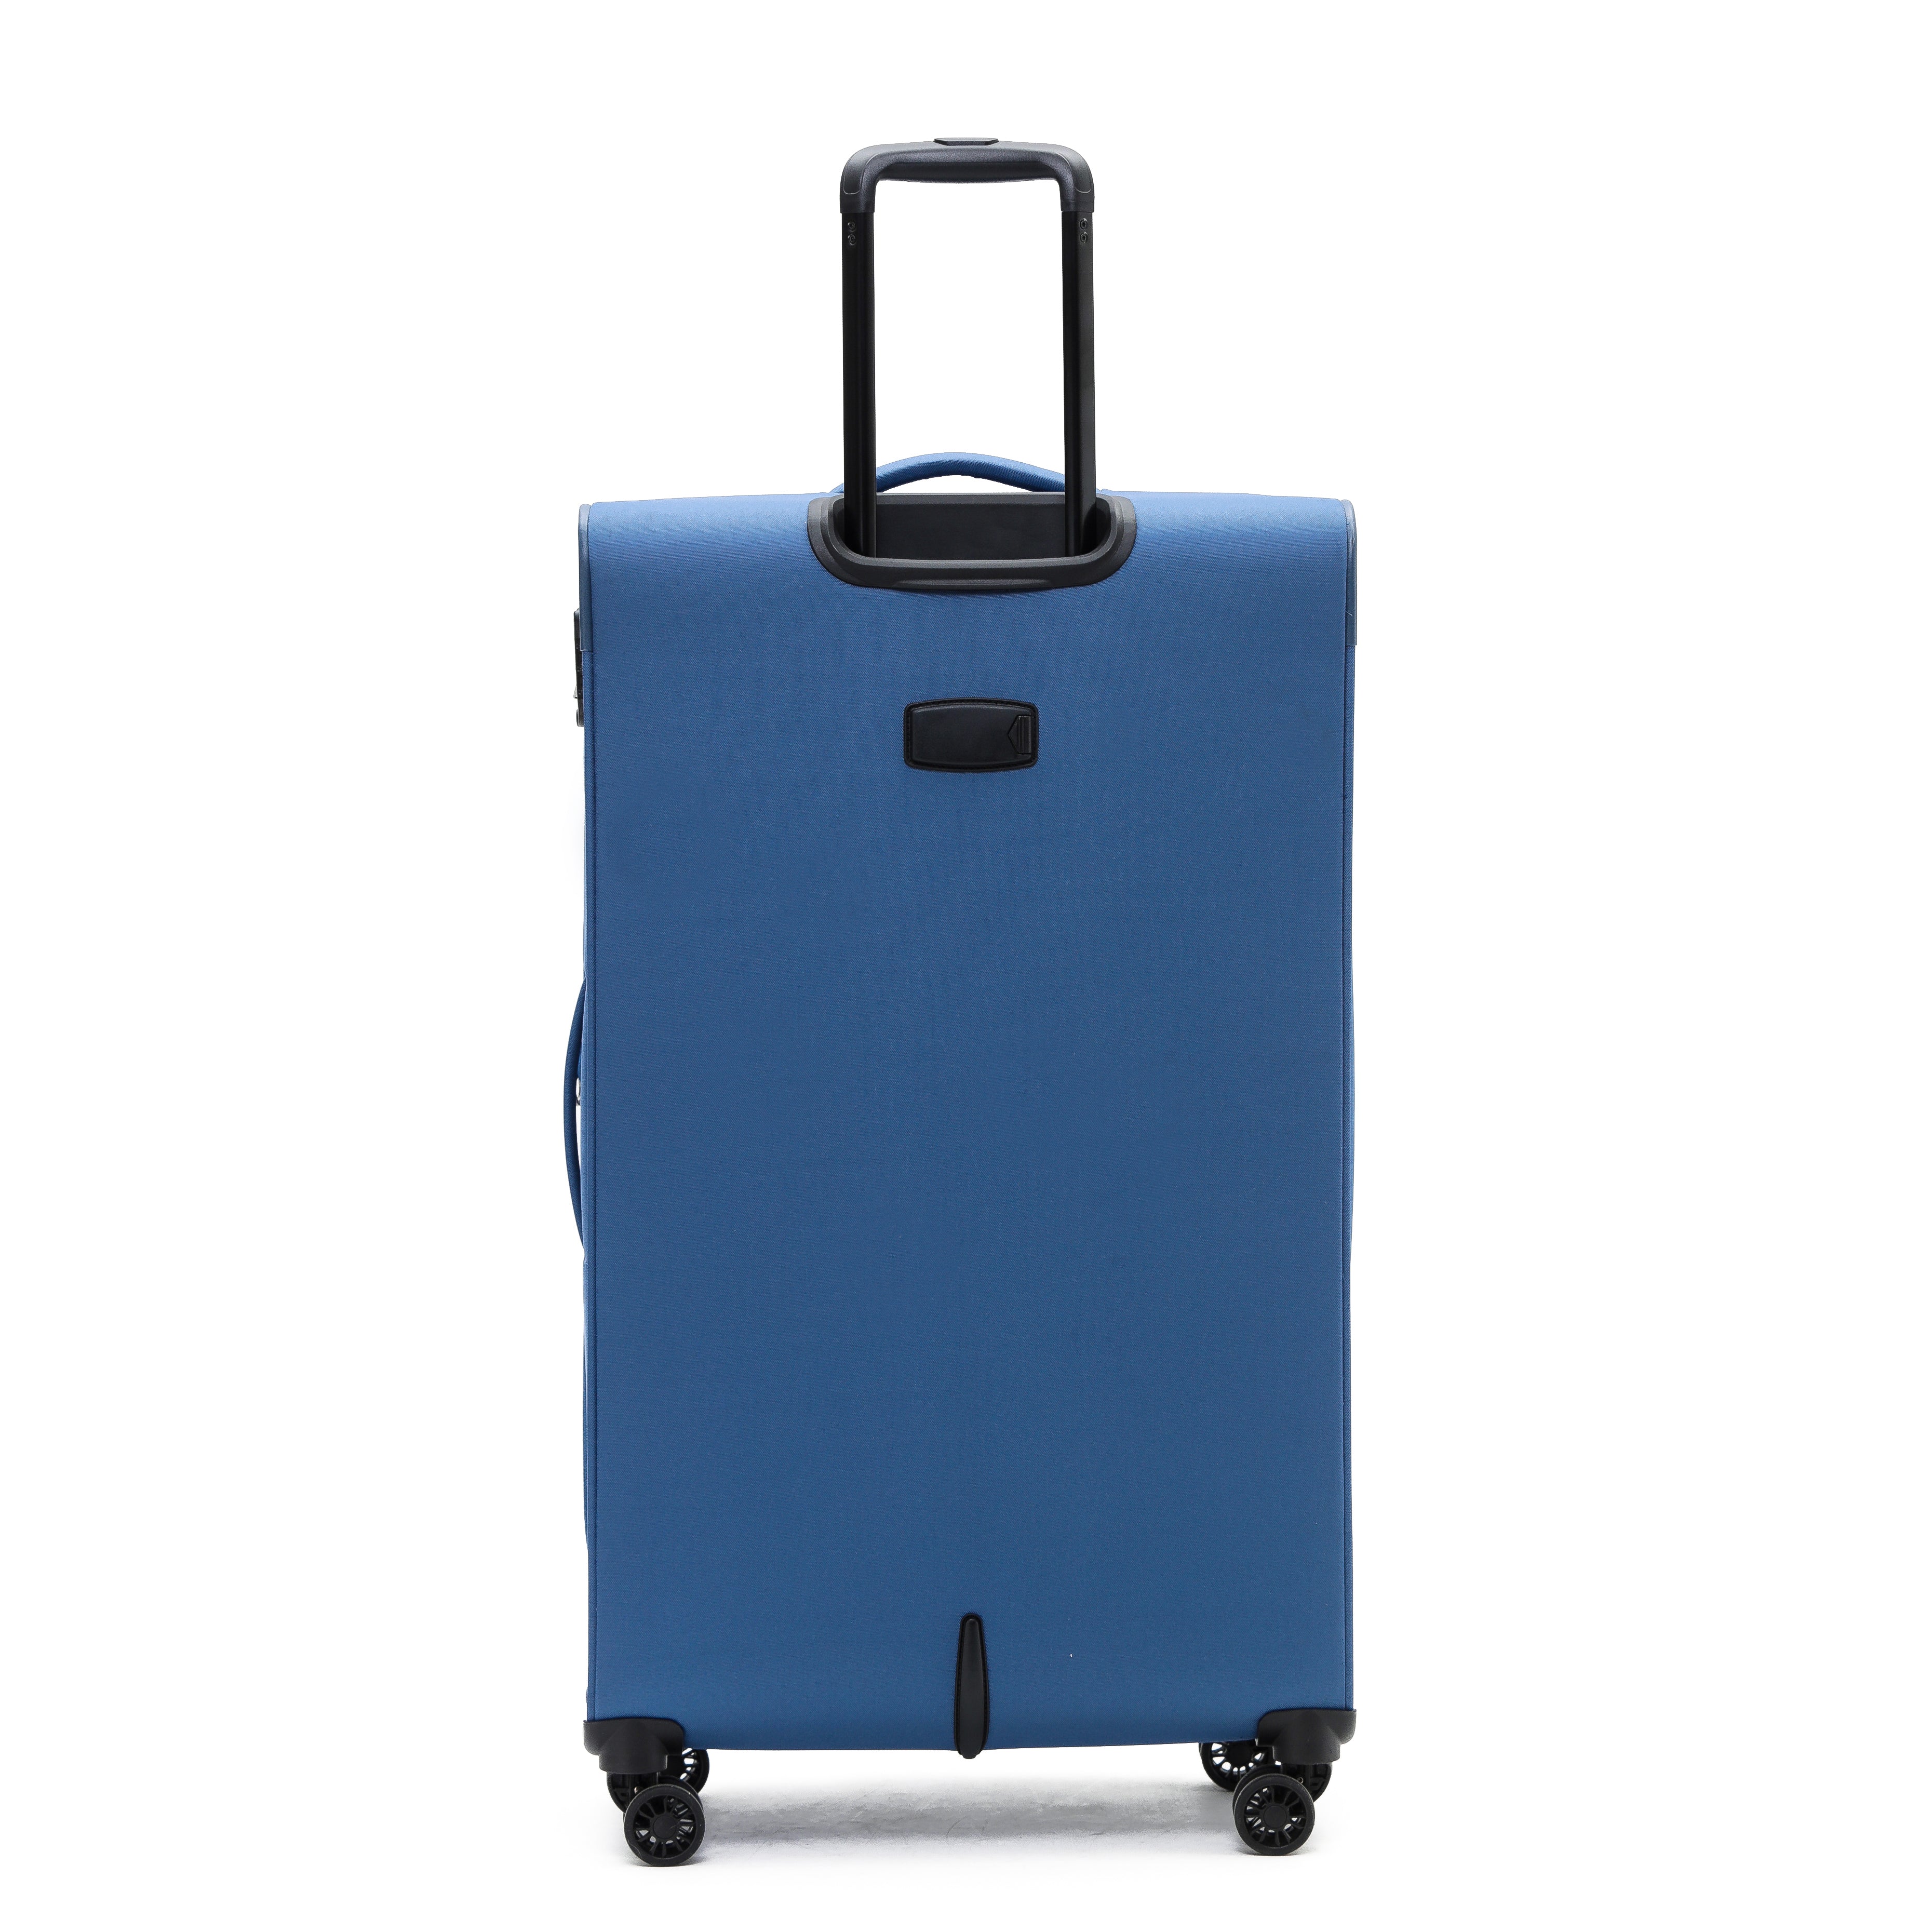 Tosca - Aviator 2.0 set of 3 suitcases (L-M-S) - Blue-3